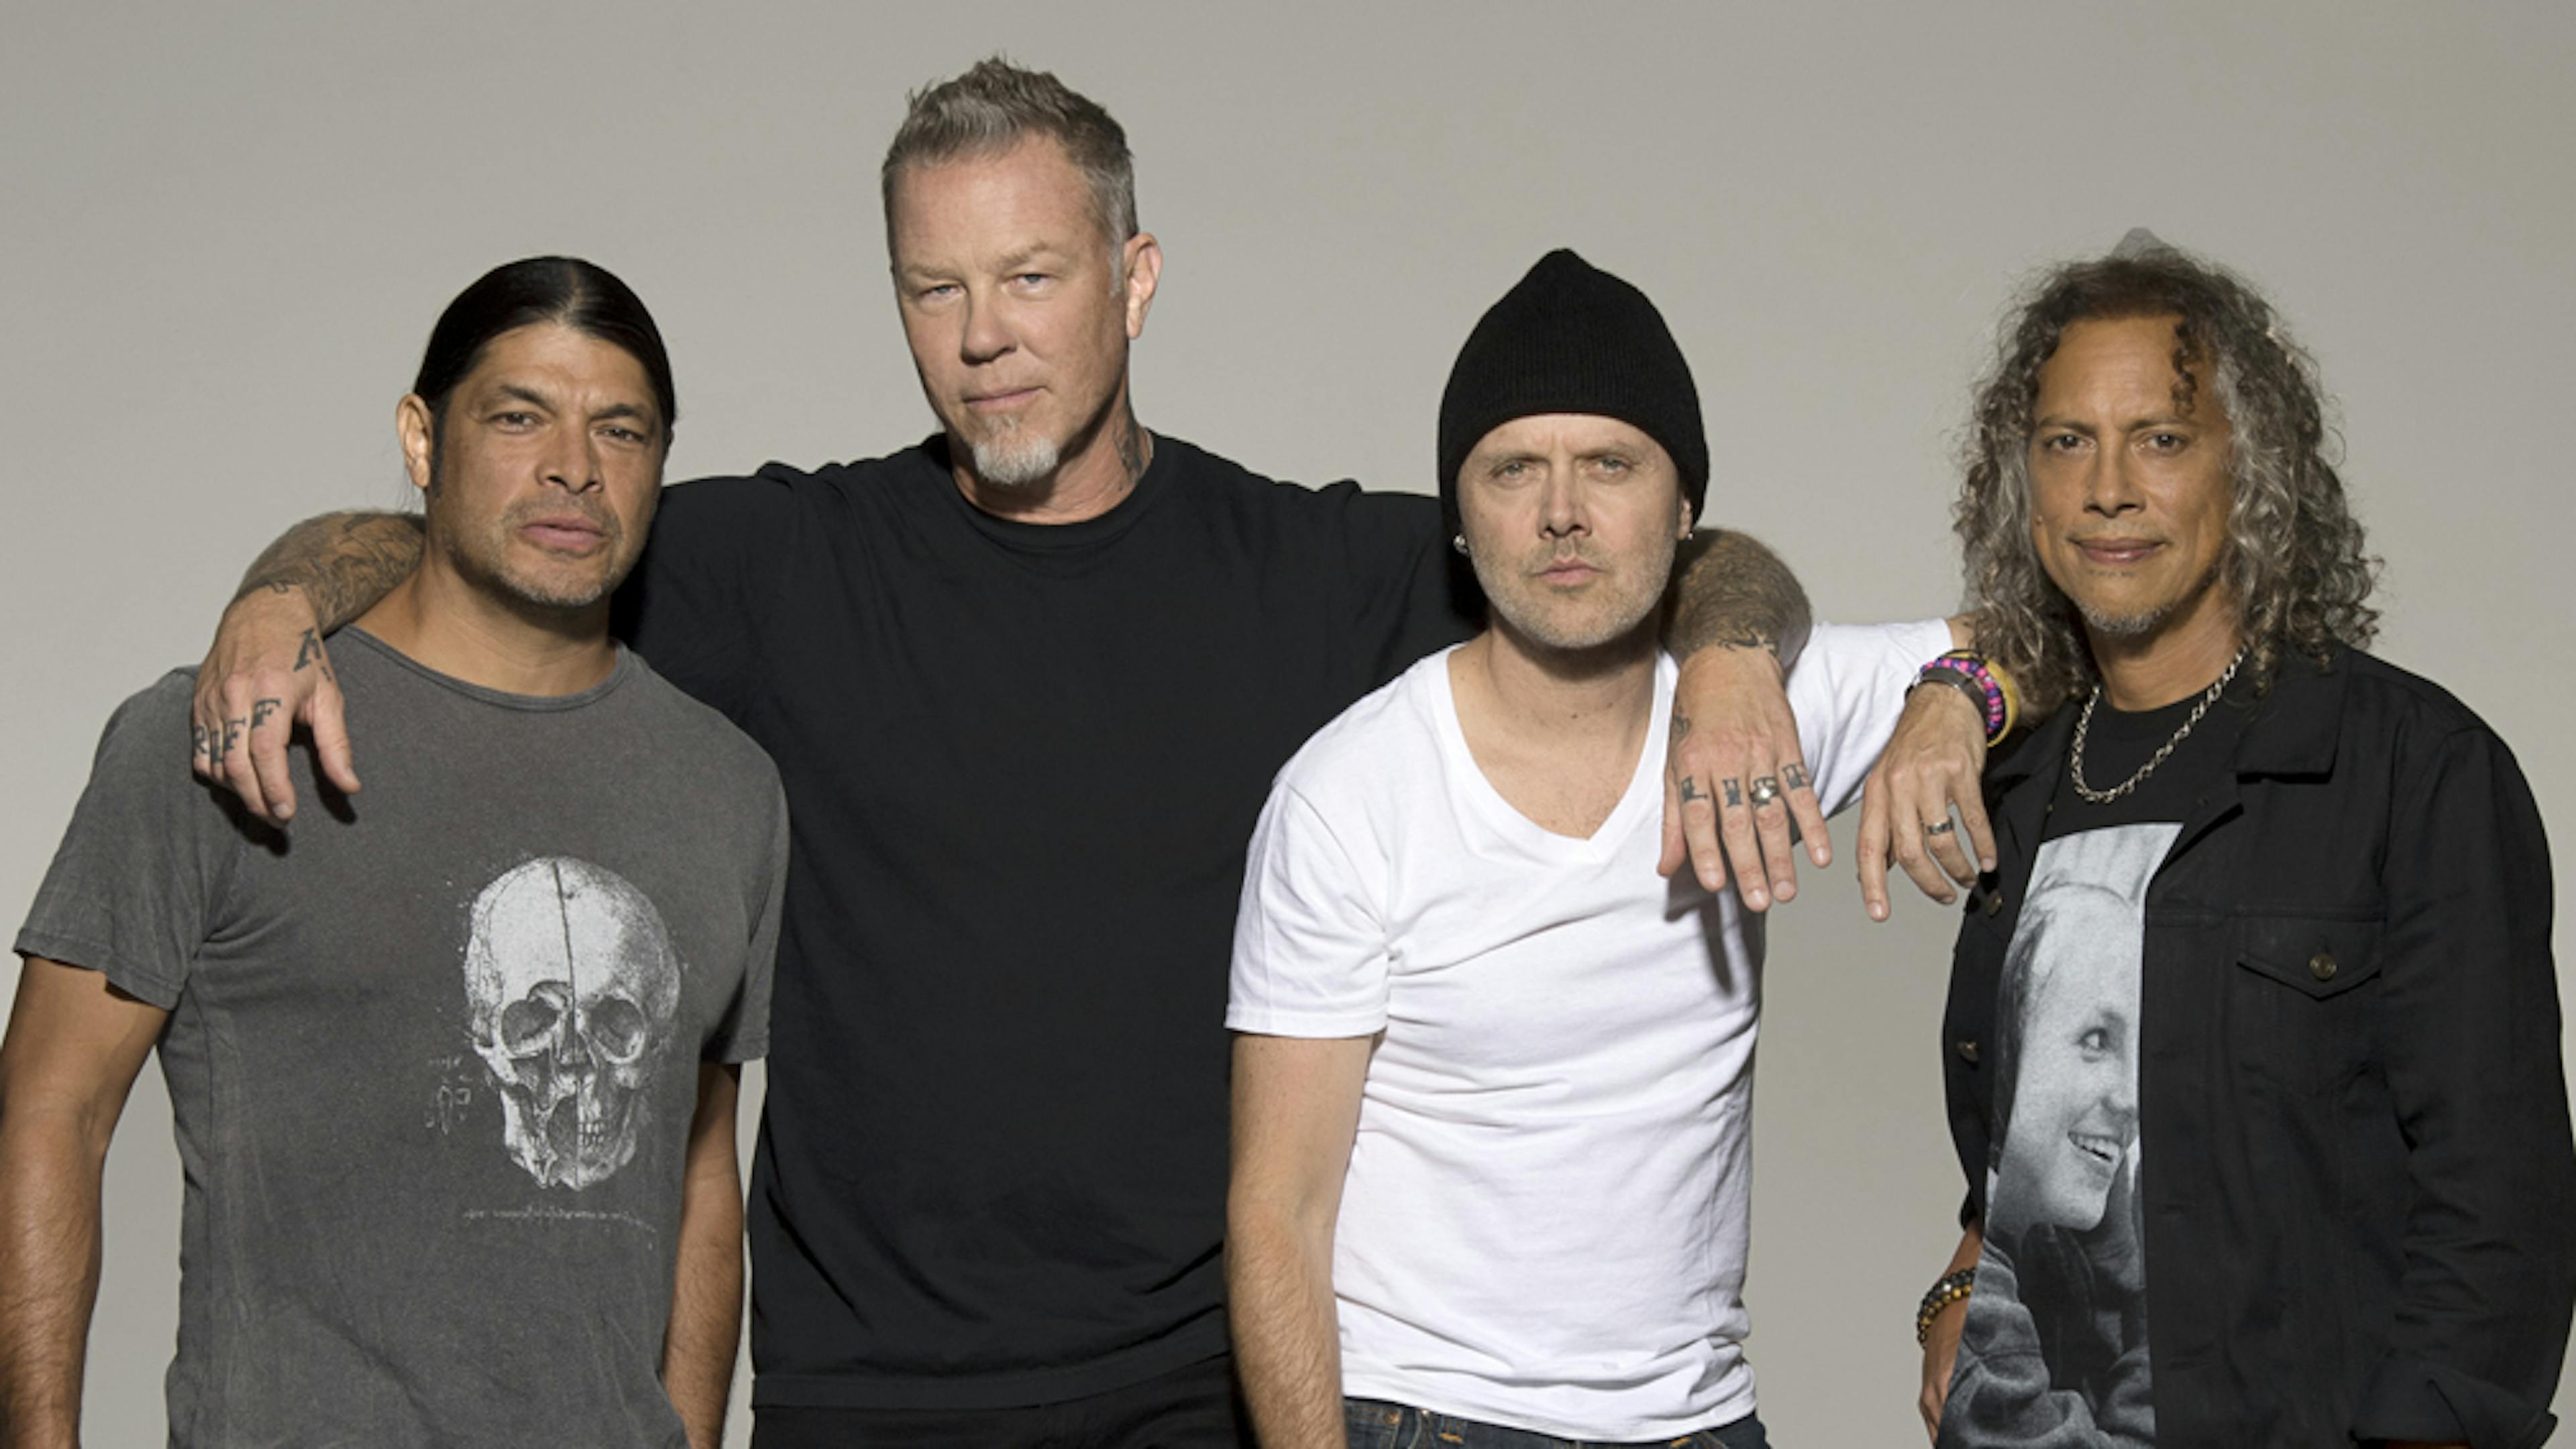 Metallica's All Within My Hands foundation donates $75,000 to Feeding Texas